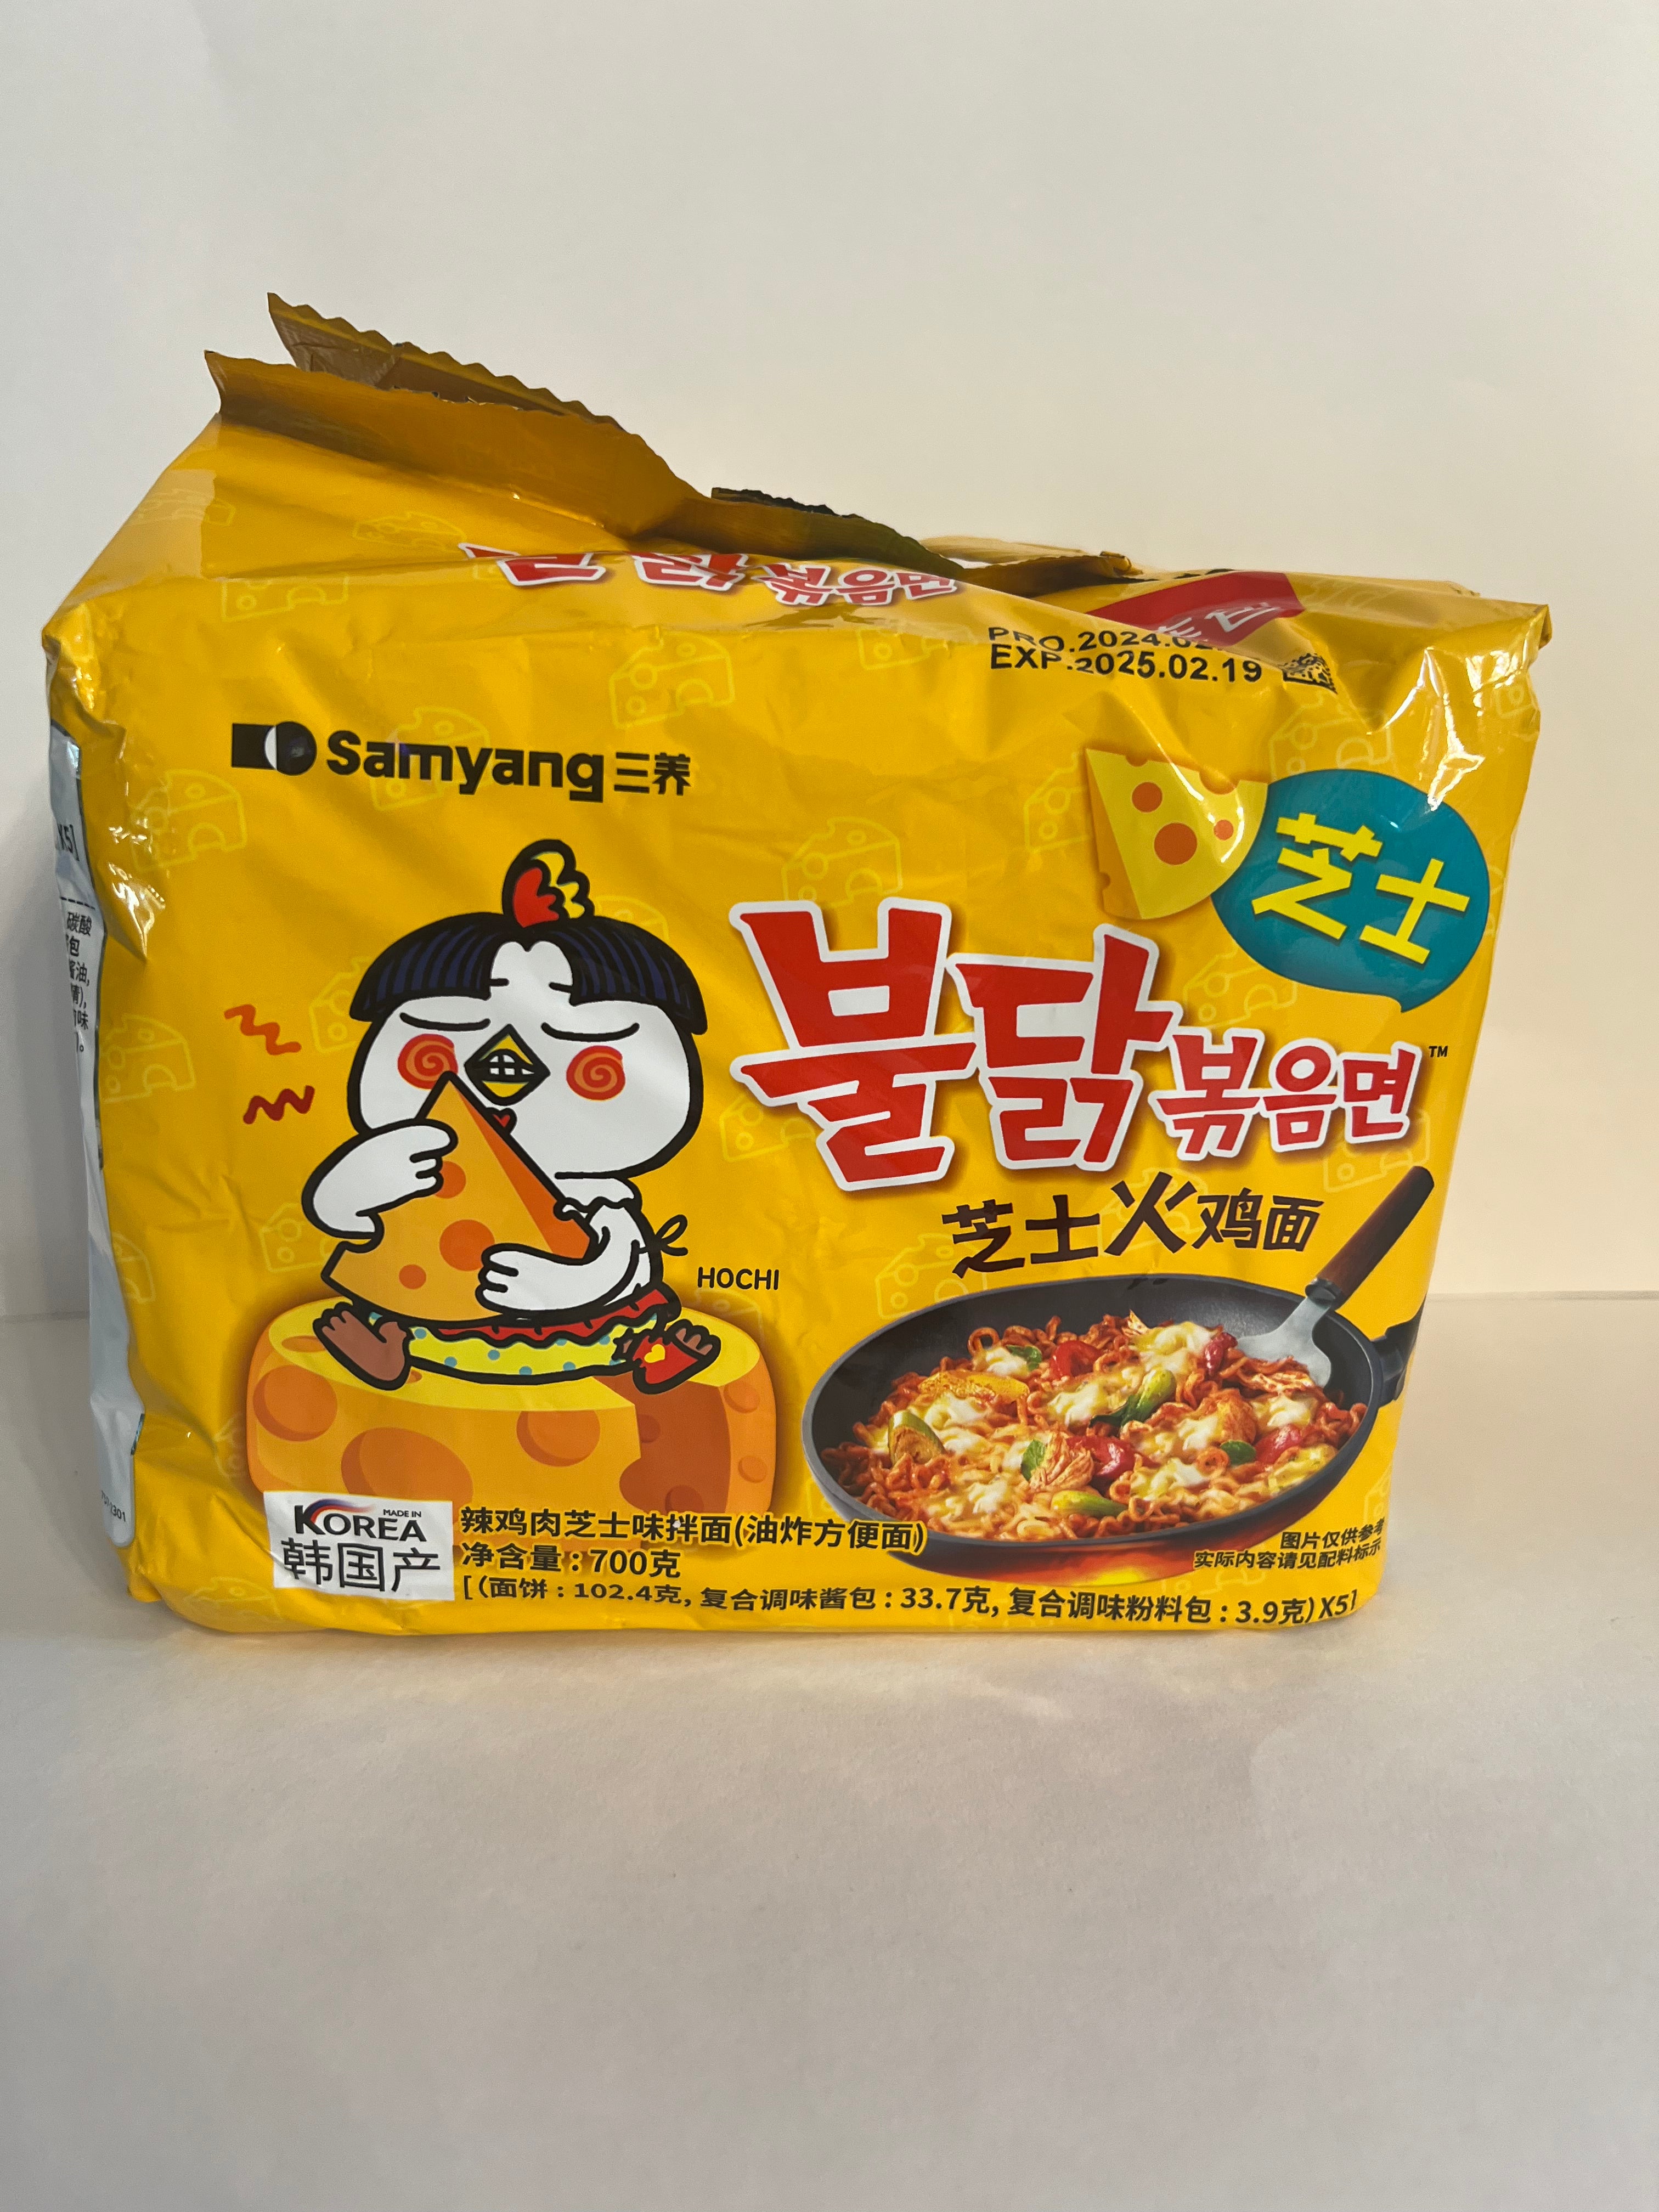 Samyang Spicy Chicken and Cheese Flavor